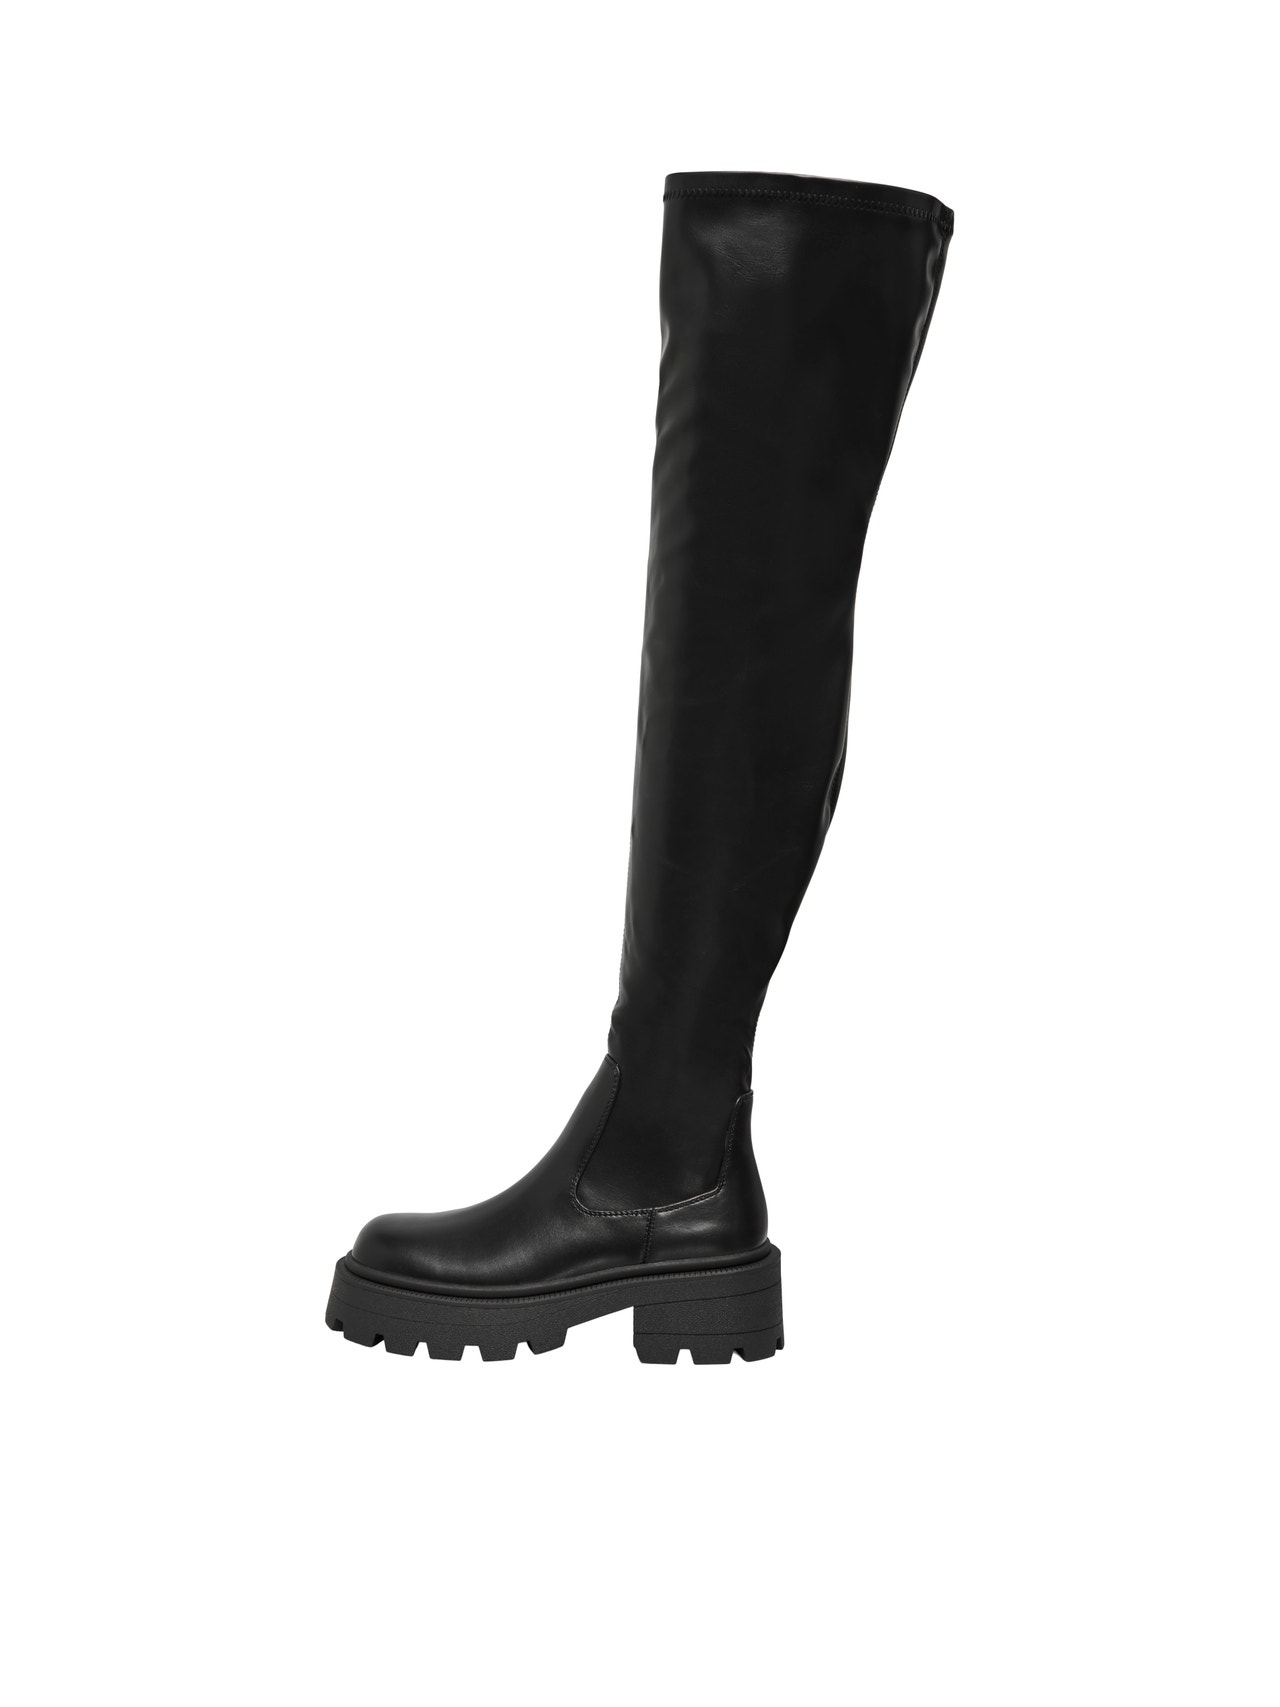 ONLY Knee high boots -Black - 15304993